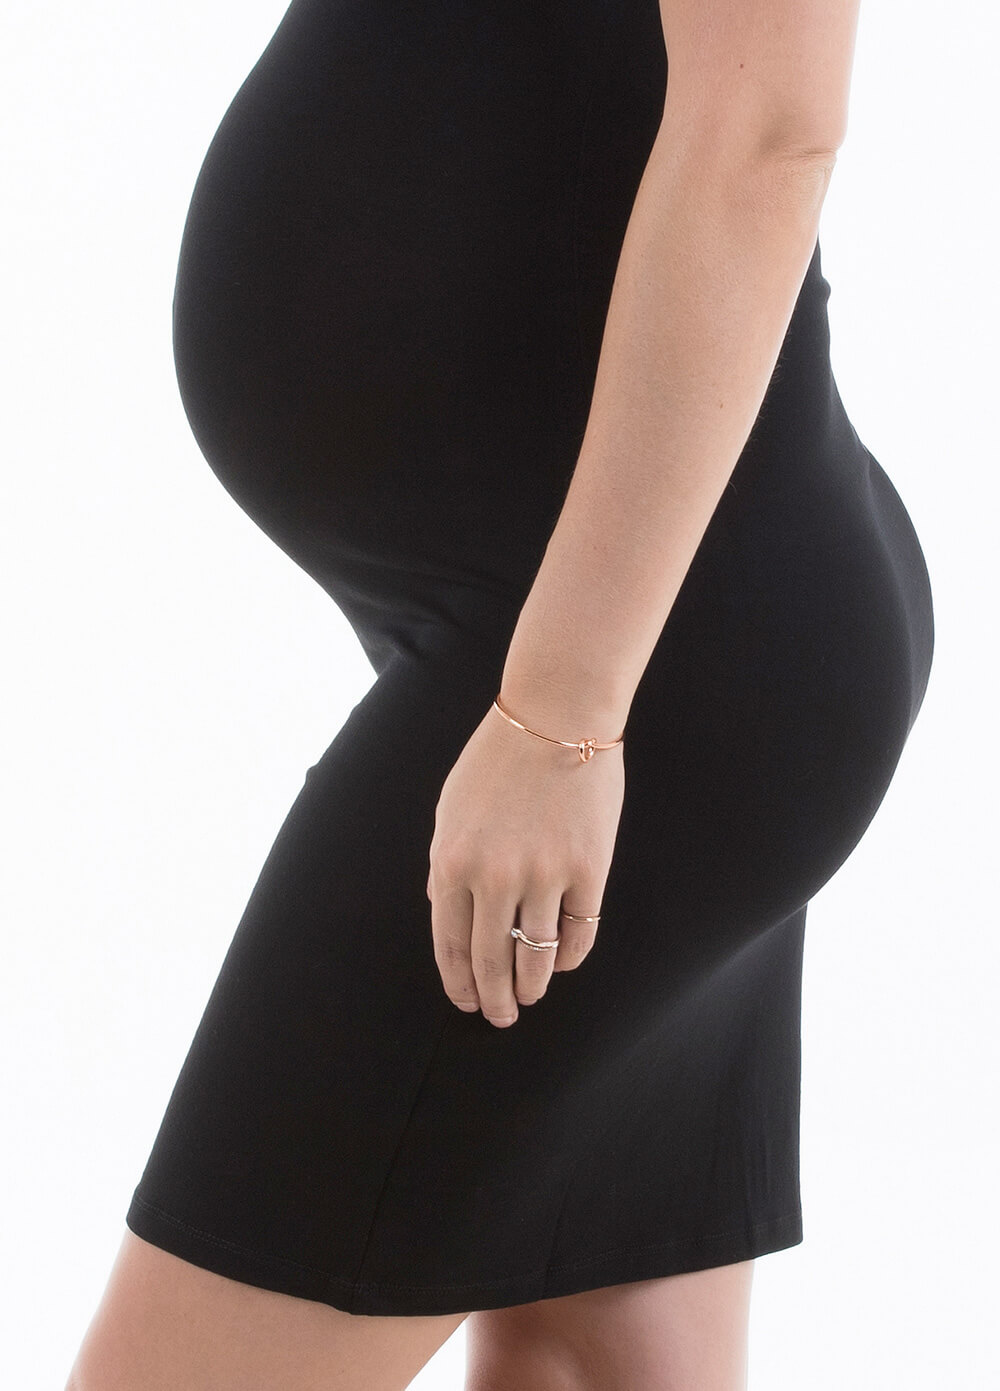 Barely There Pregnancy Slip in Black by Trimester® 